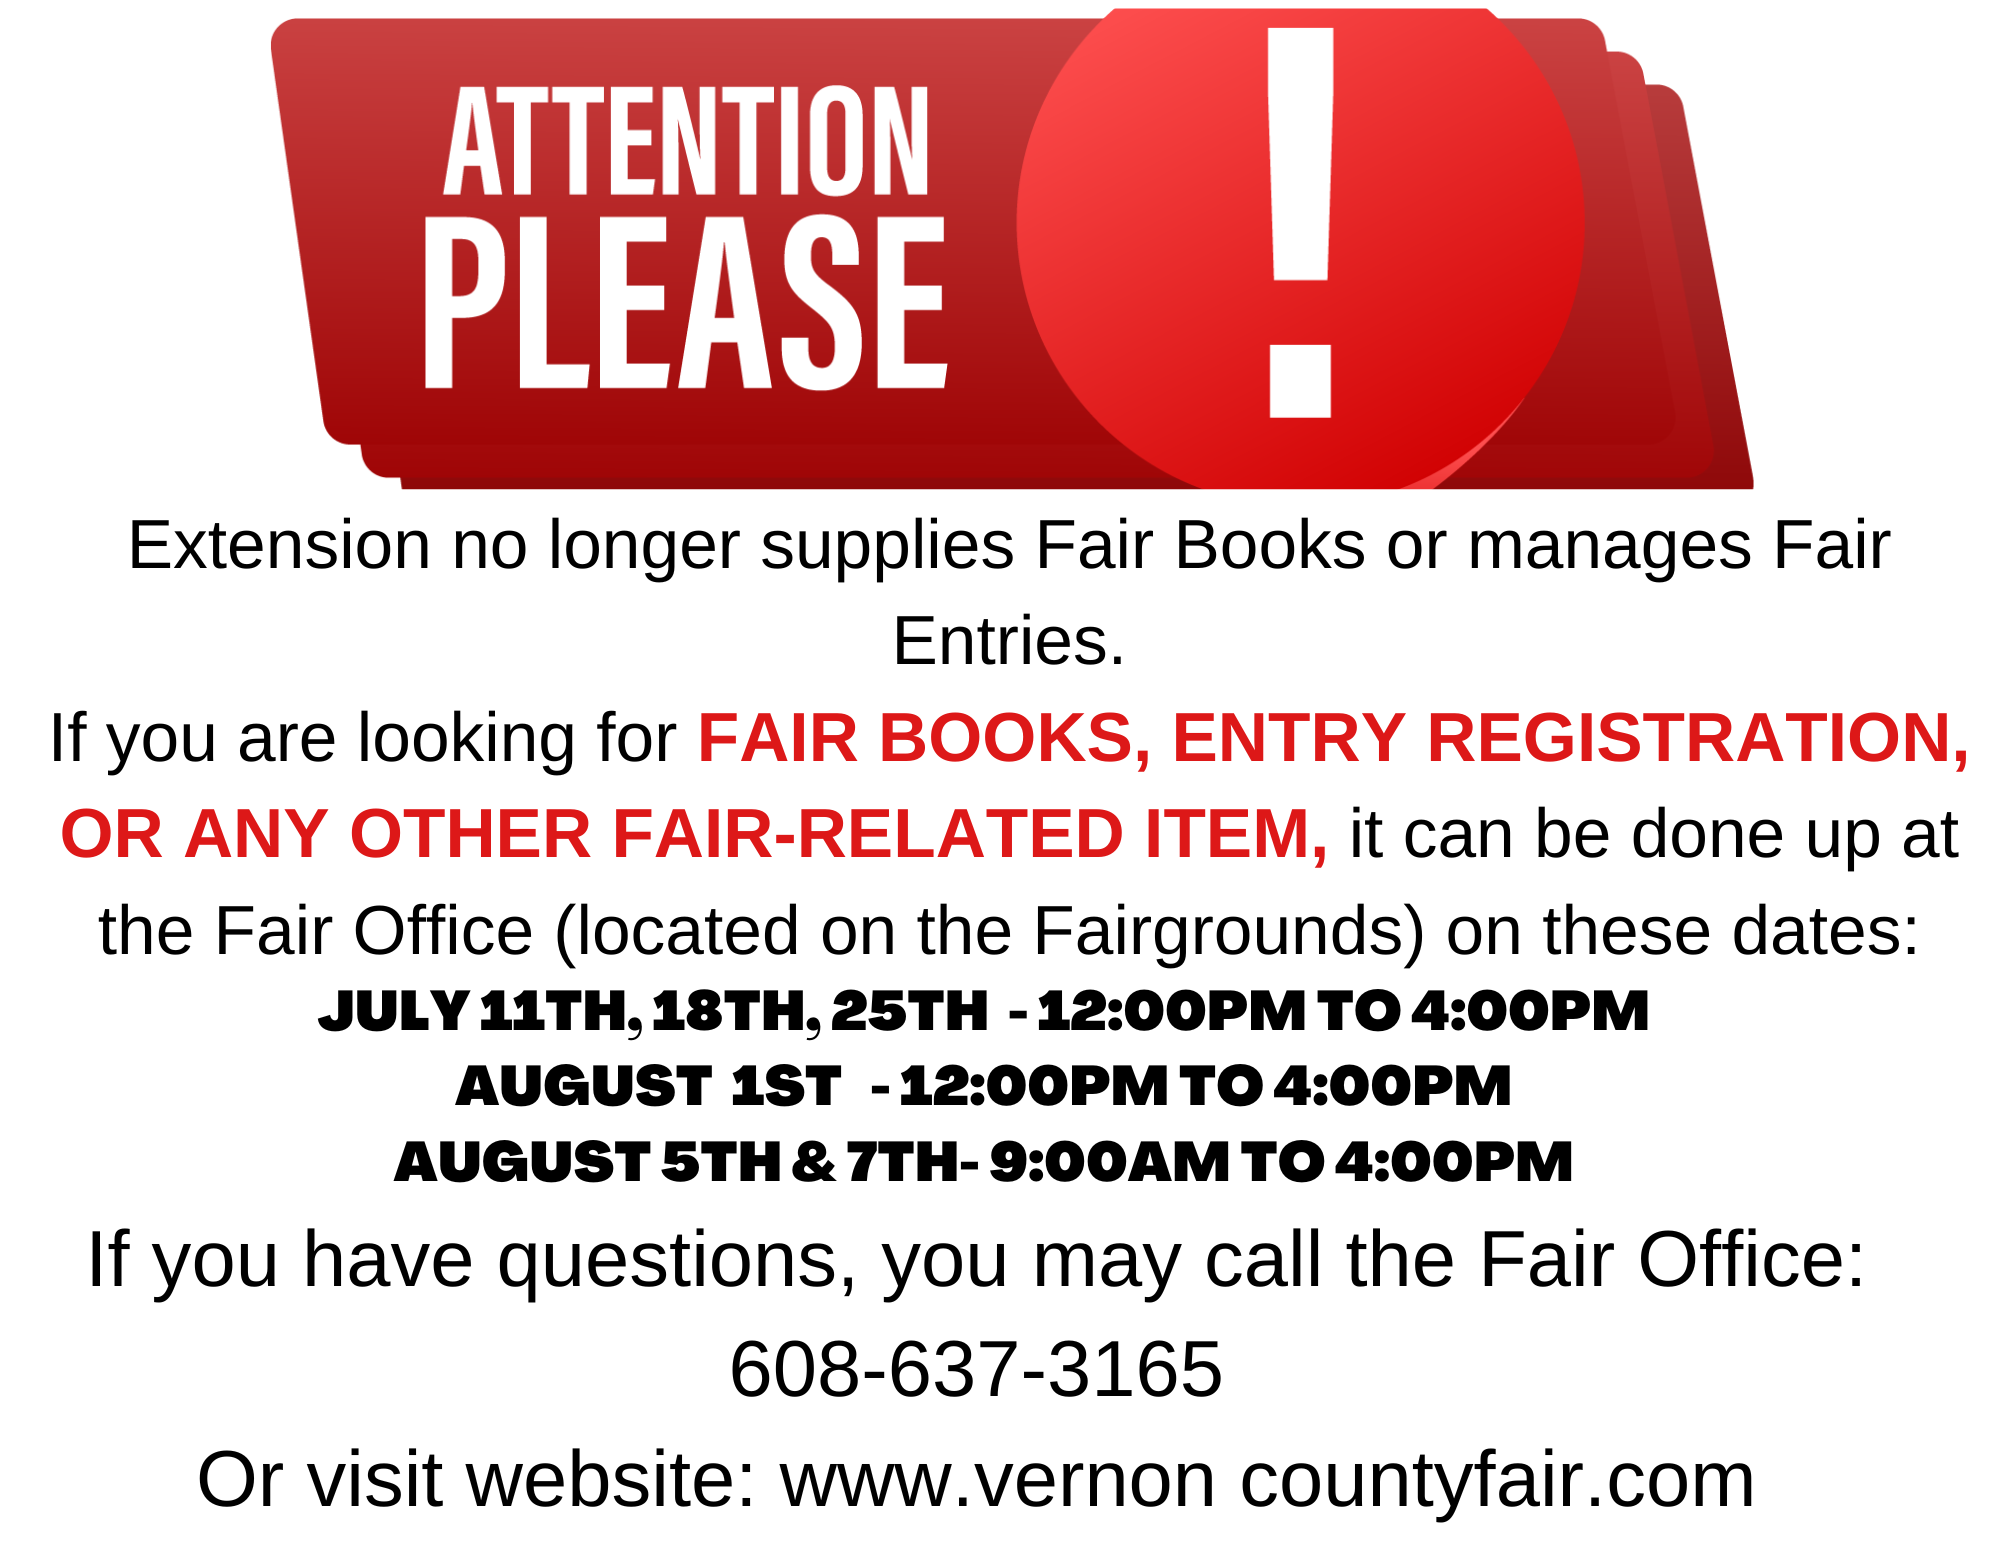 REMINDER: Extension NO LONGER manages fair related inquiries, such as giving out Fair Books, enrolling fair entries, or other fair related requests.

Please call the Fair Office with any questions you may have: 608-637-3165, or visit their website for more info: www.vernoncountyfair.com

The dates the fair office will be open are as follows:

July 25th - 12:00PM to 4:00PM

August 1st - 12:00PM to 4:00PM

August 5th & 7th - 9:00AM to 4:00PM

The fair office is located on the Vernon County Fairgrounds.